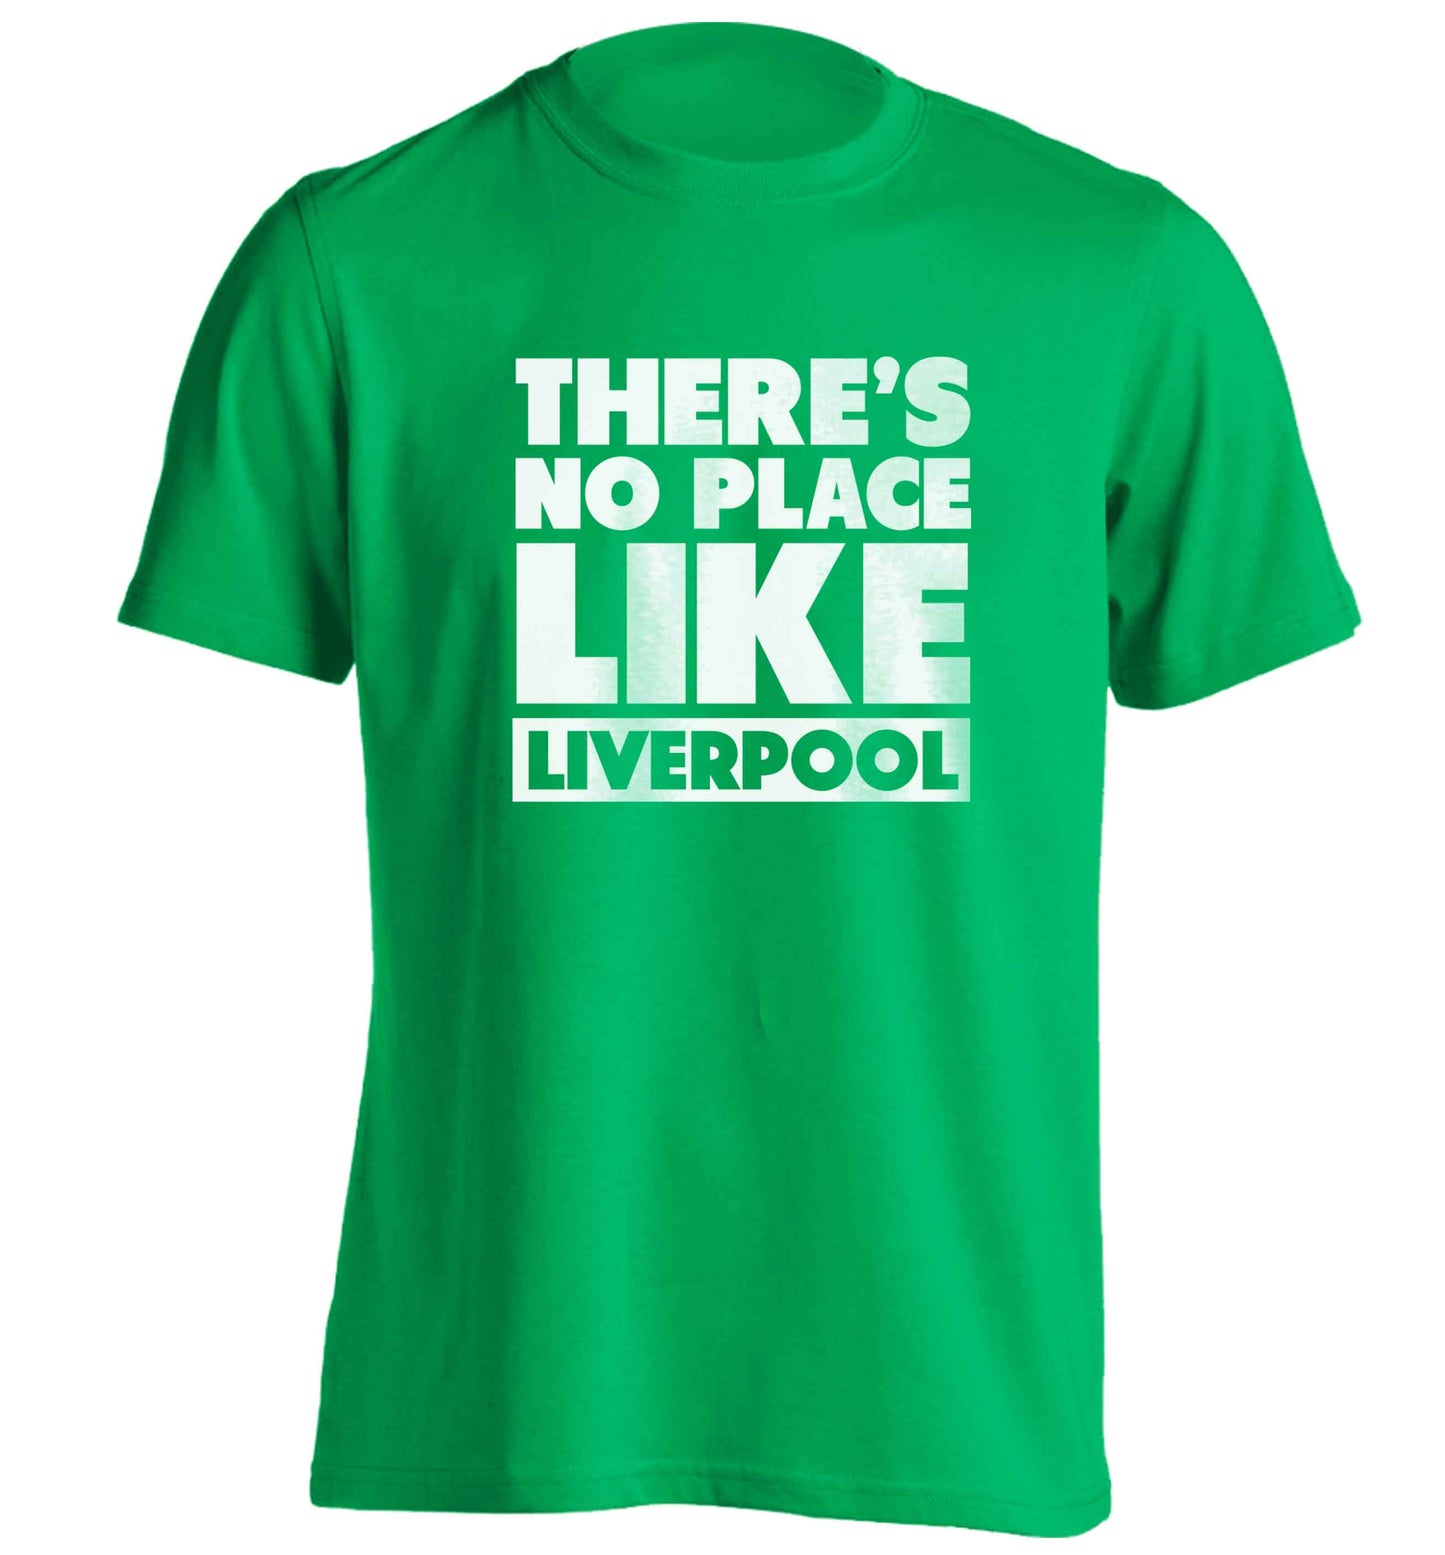 There's no place like Liverpool adults unisex green Tshirt 2XL